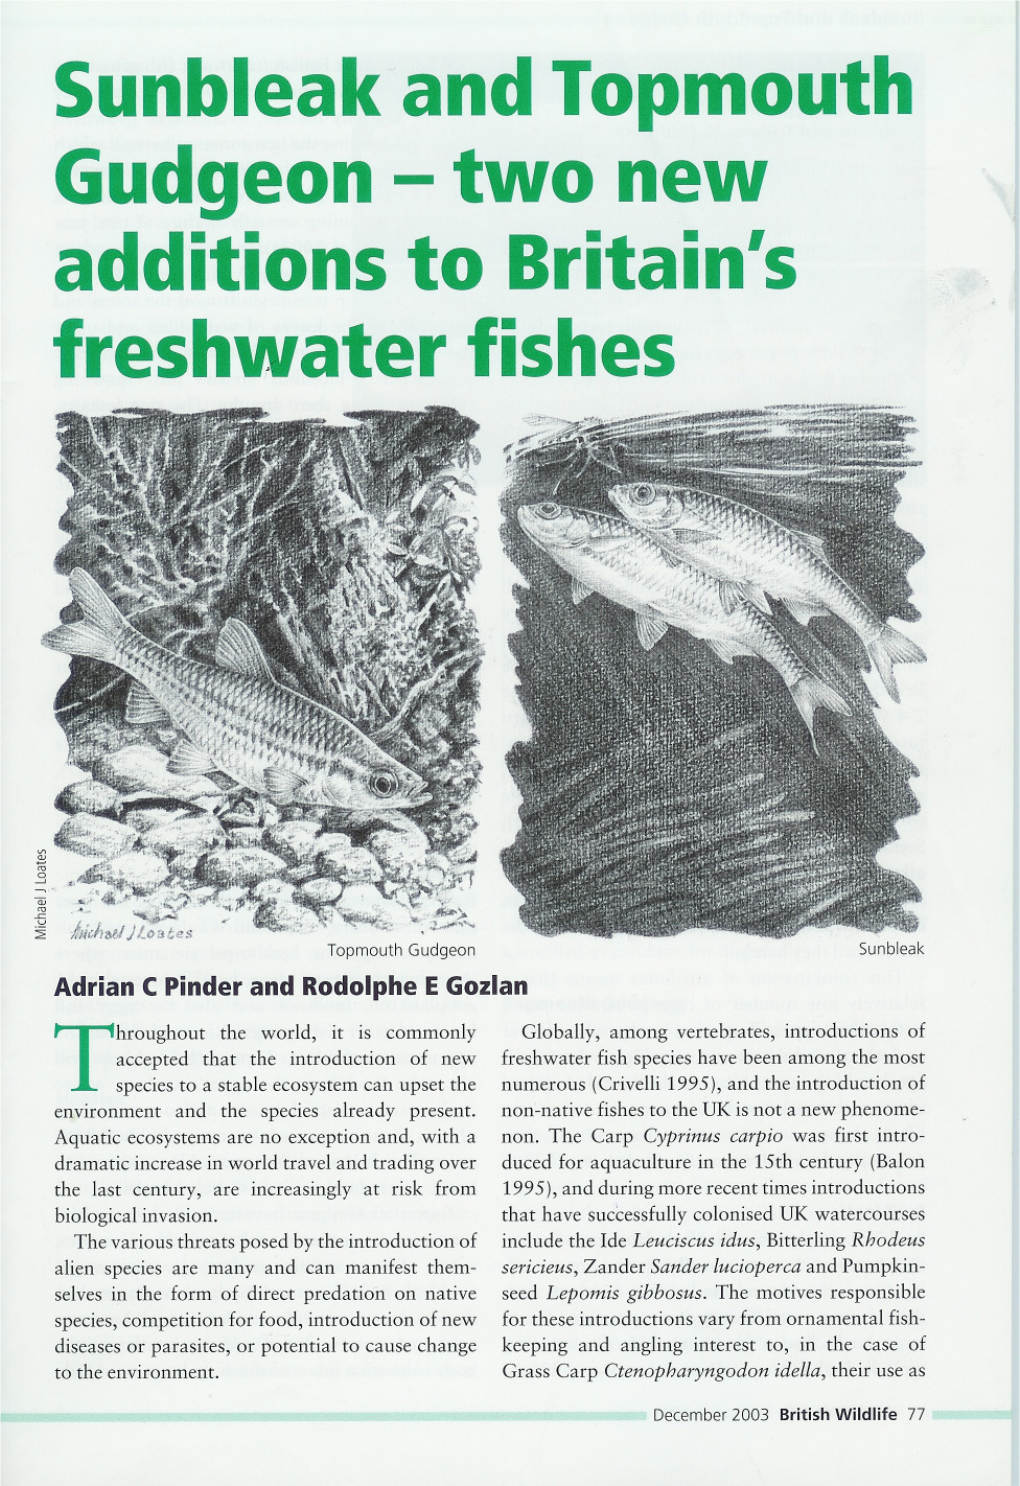 Gudgeon- Two New Additions to Britain's Freshwater Fishes